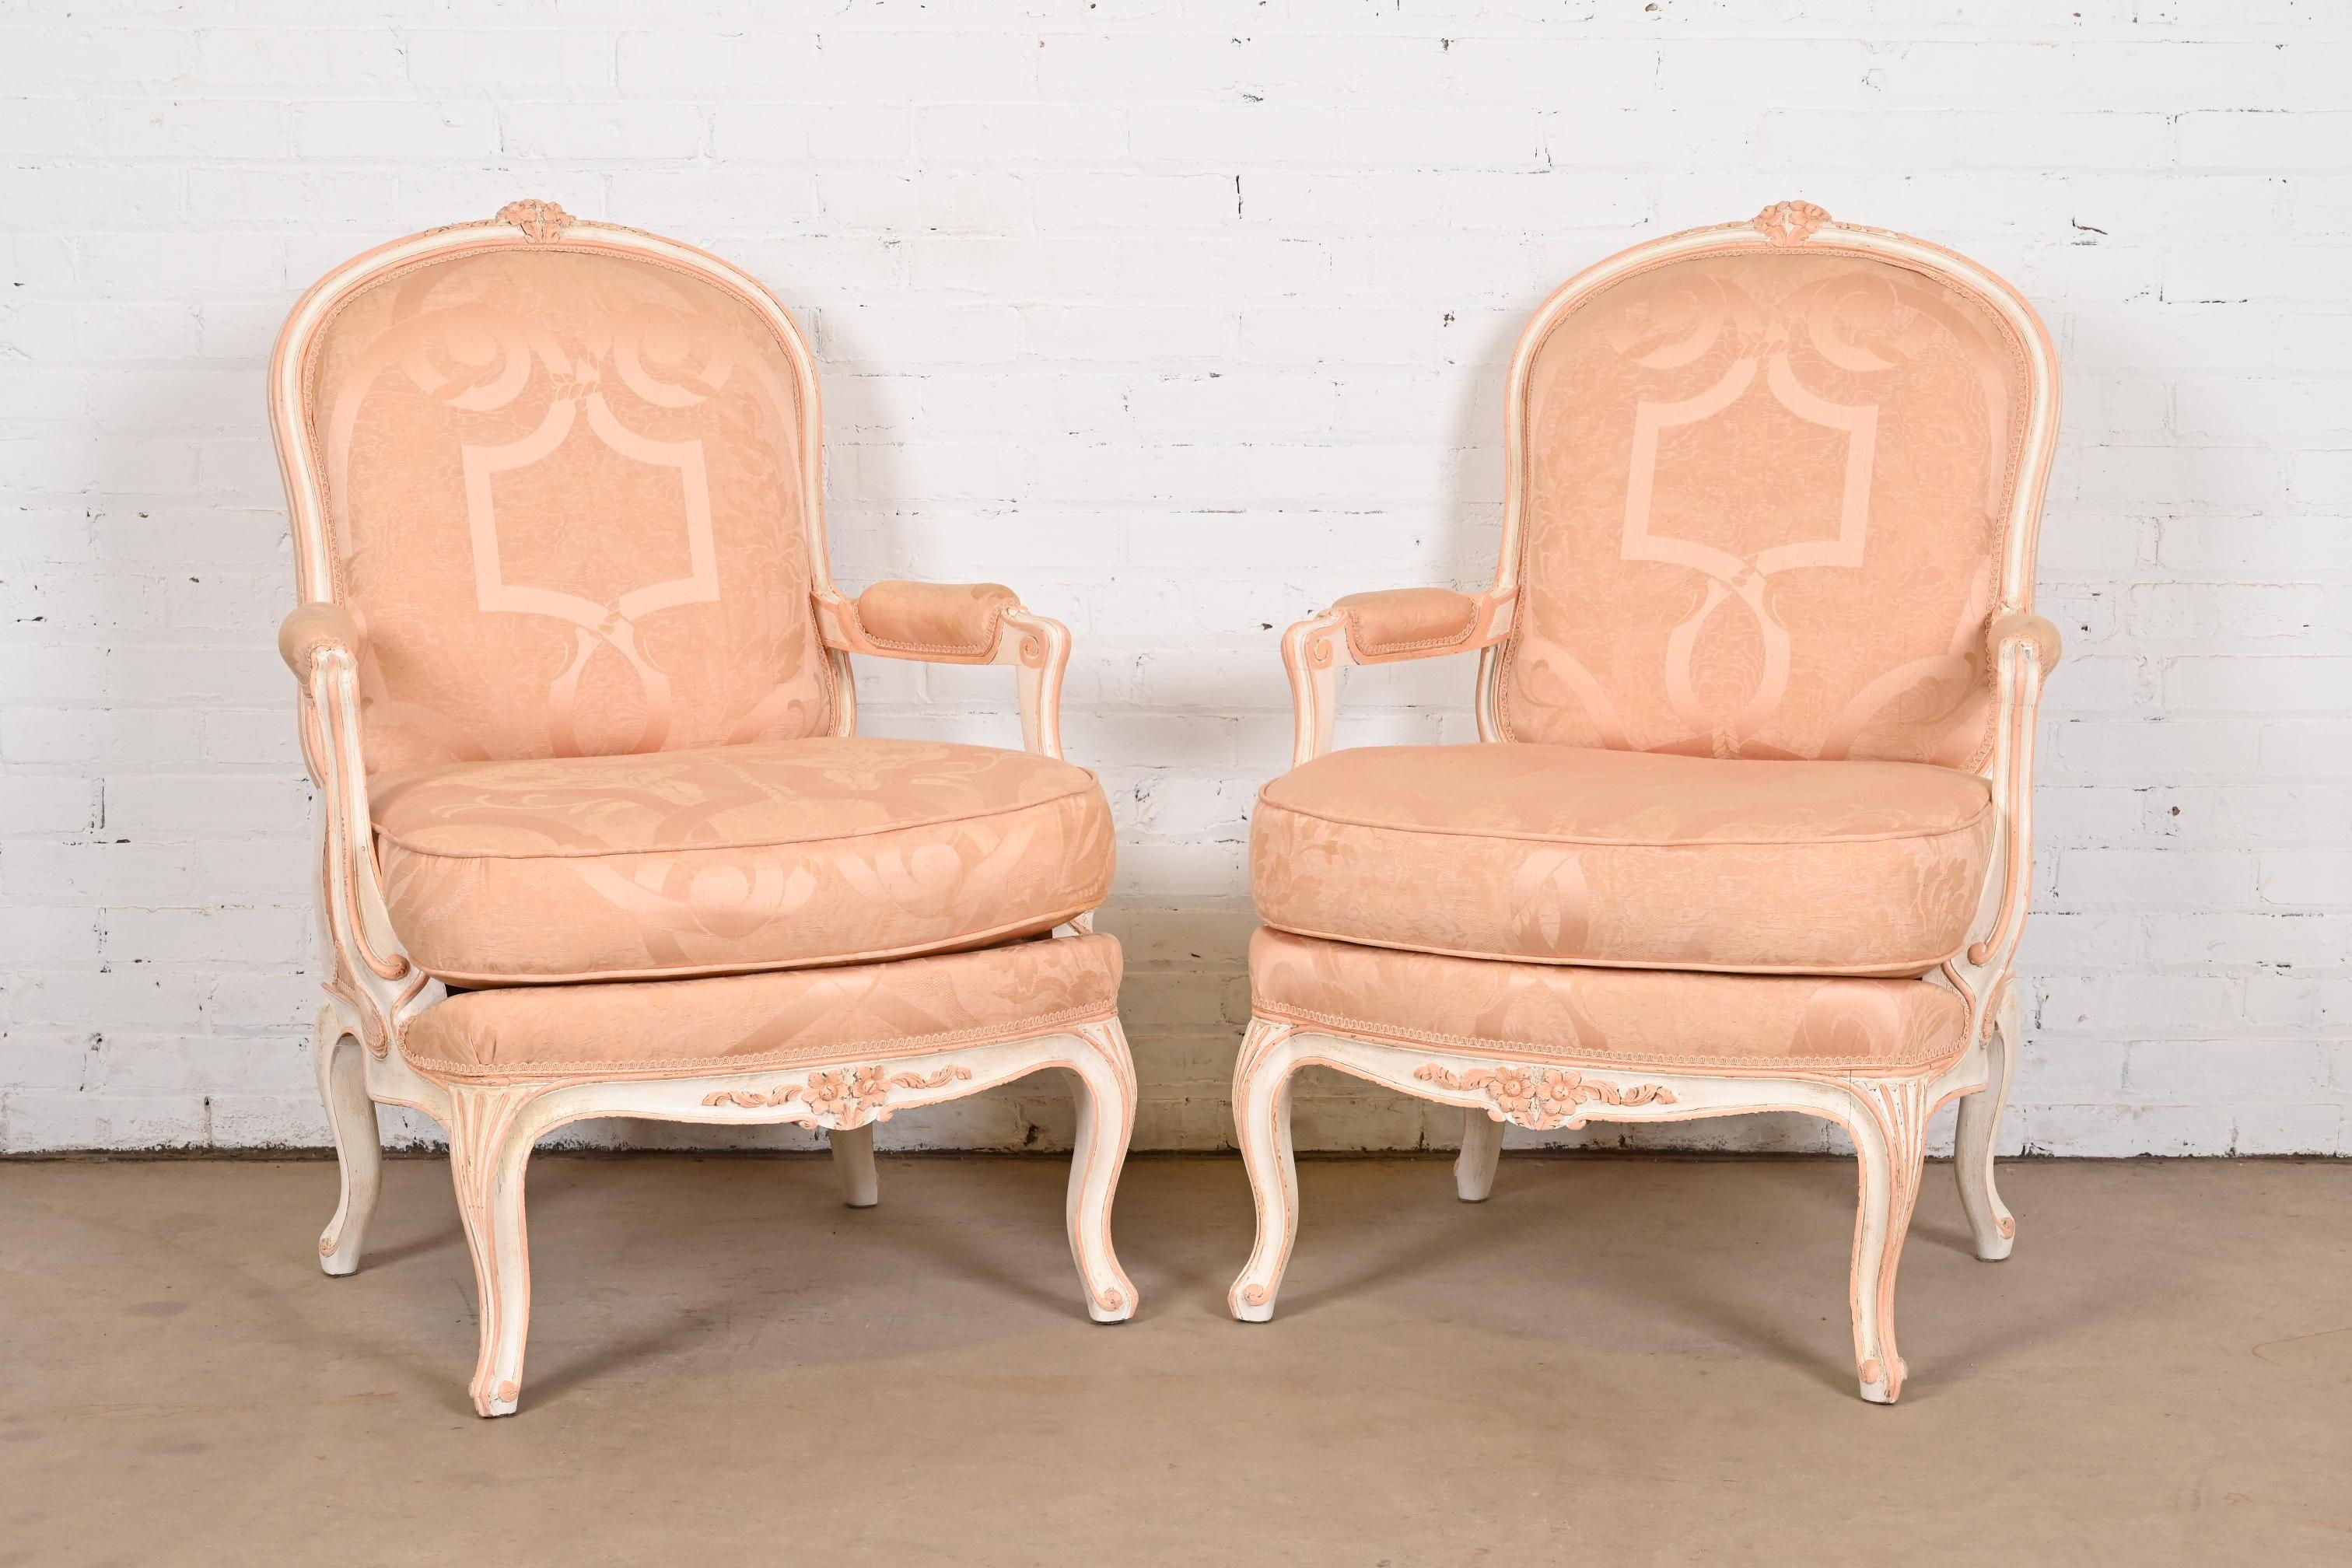 American French Provincial Louis XV Carved Painted Walnut Fauteuils, Pair For Sale